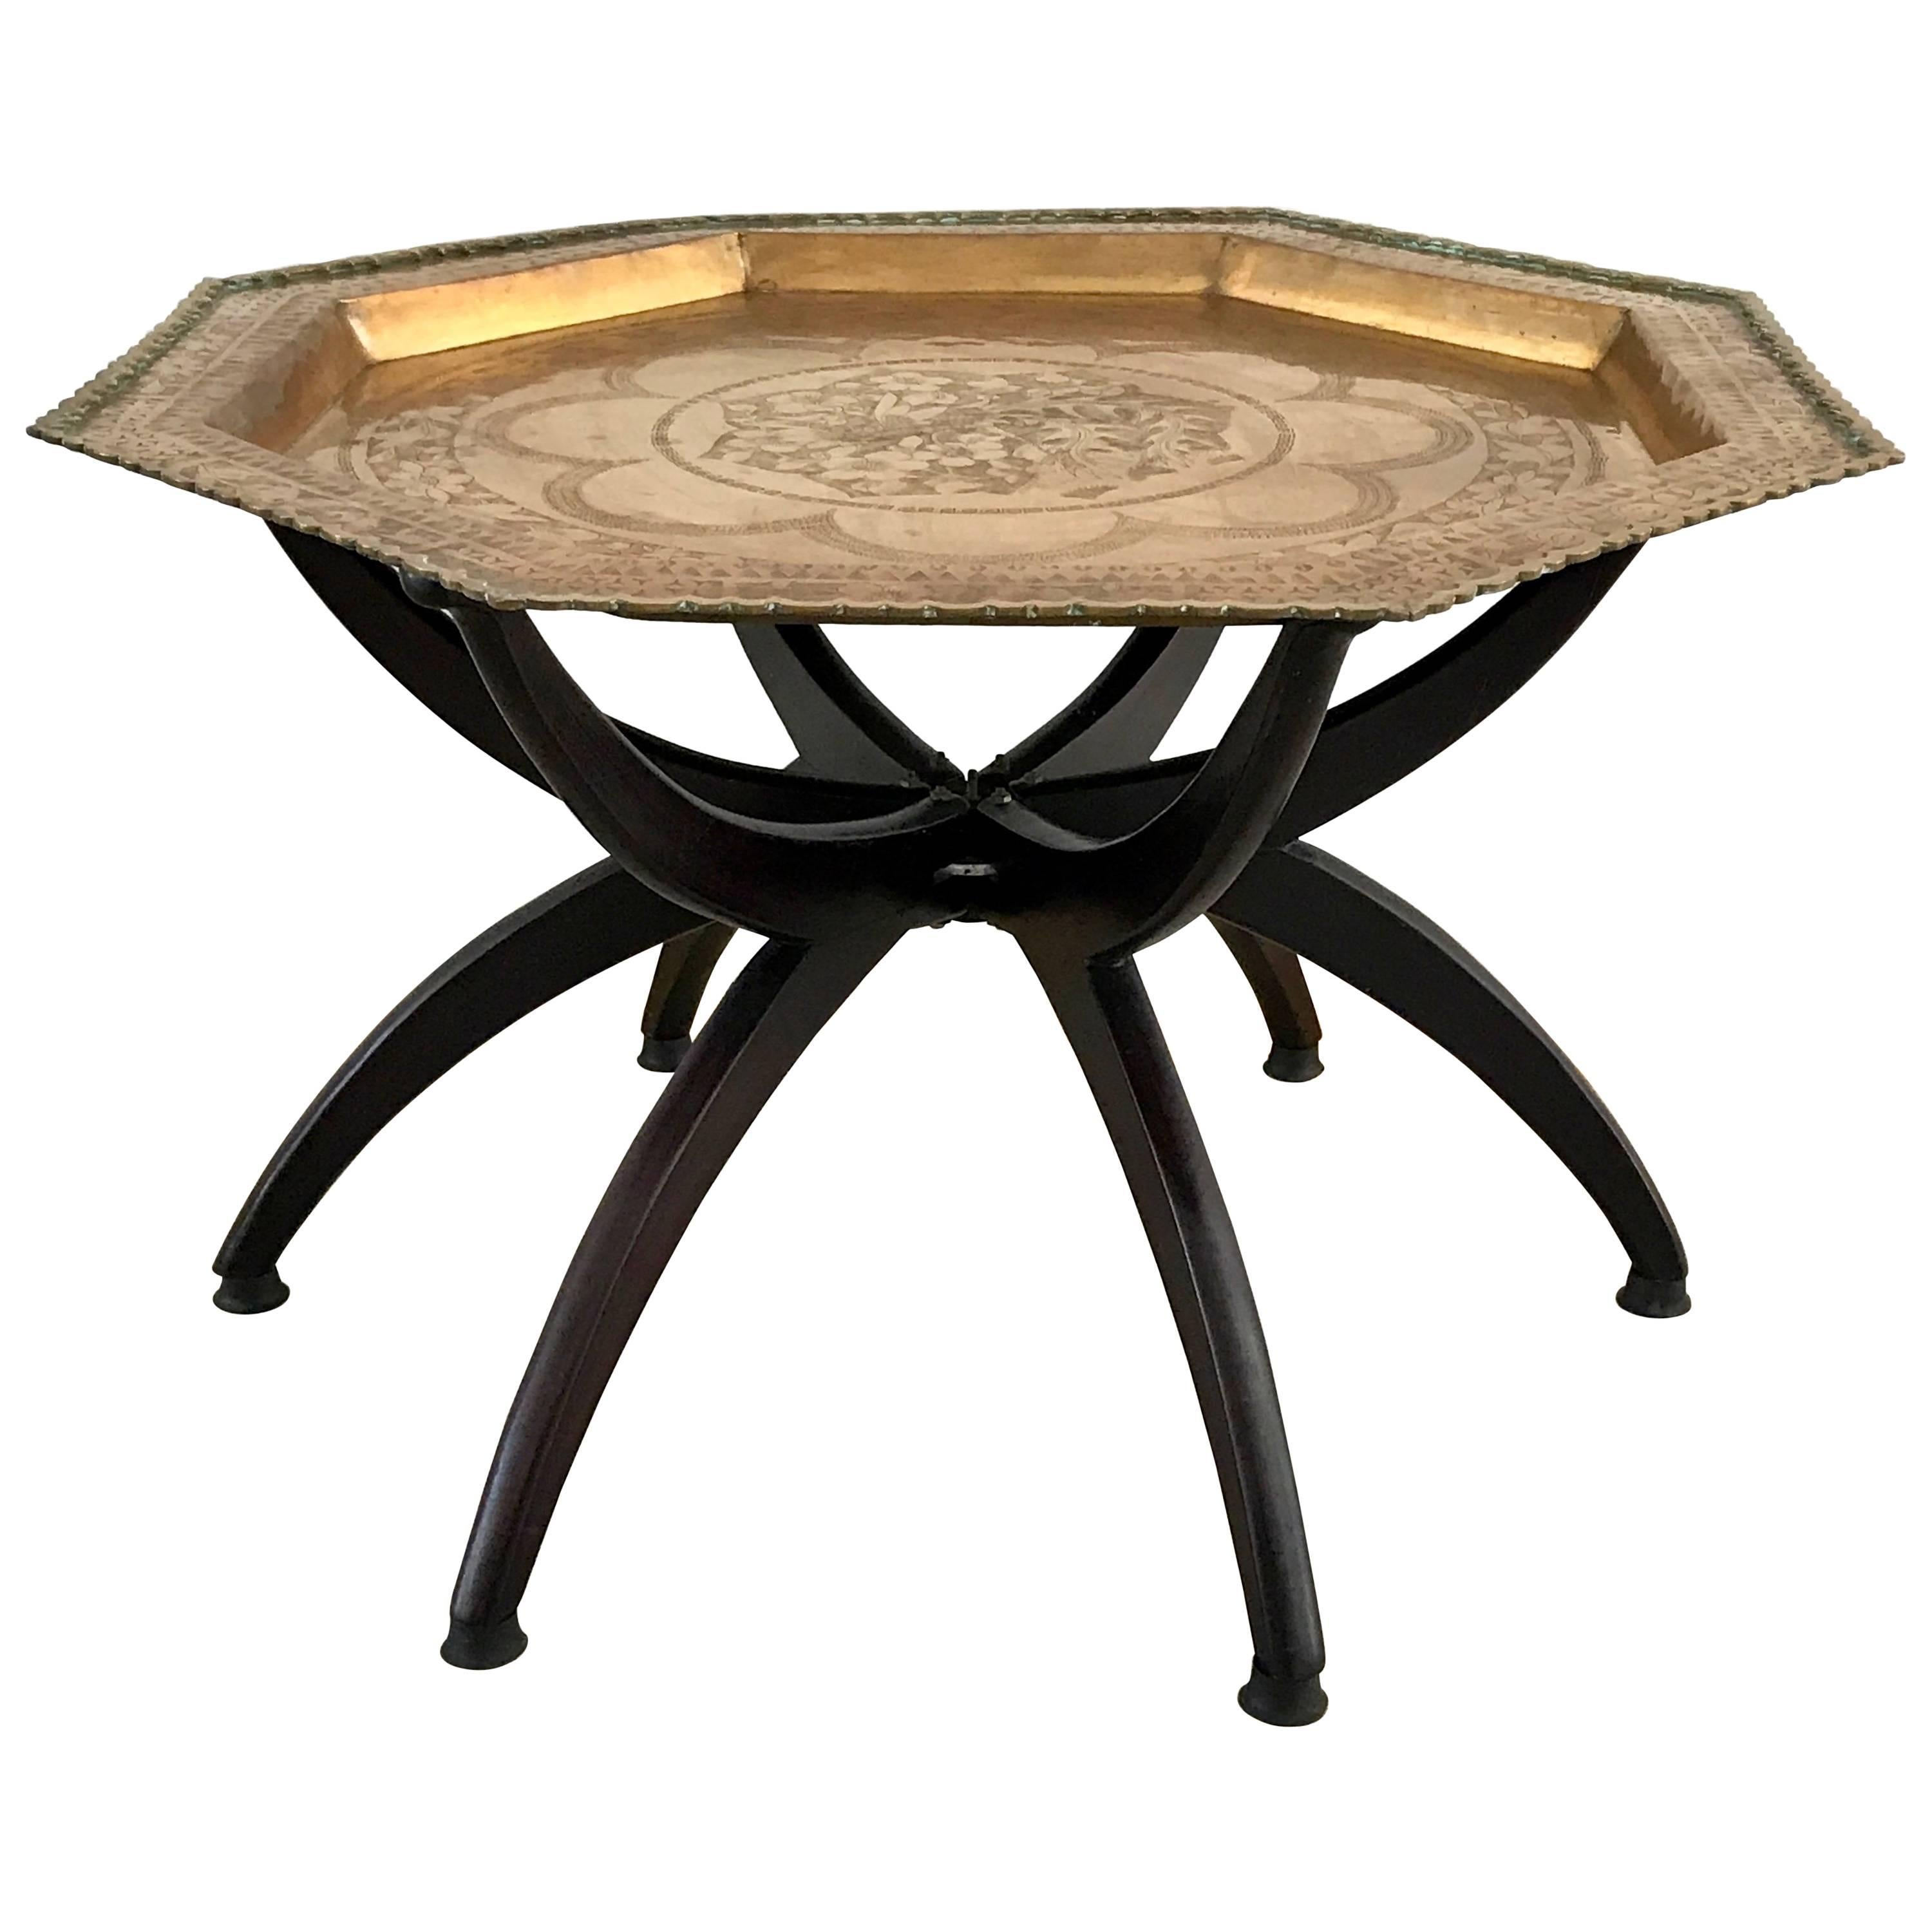 Mid-Century Brass Tray Table with Spider Leg Base, Hong Kong, 1950's